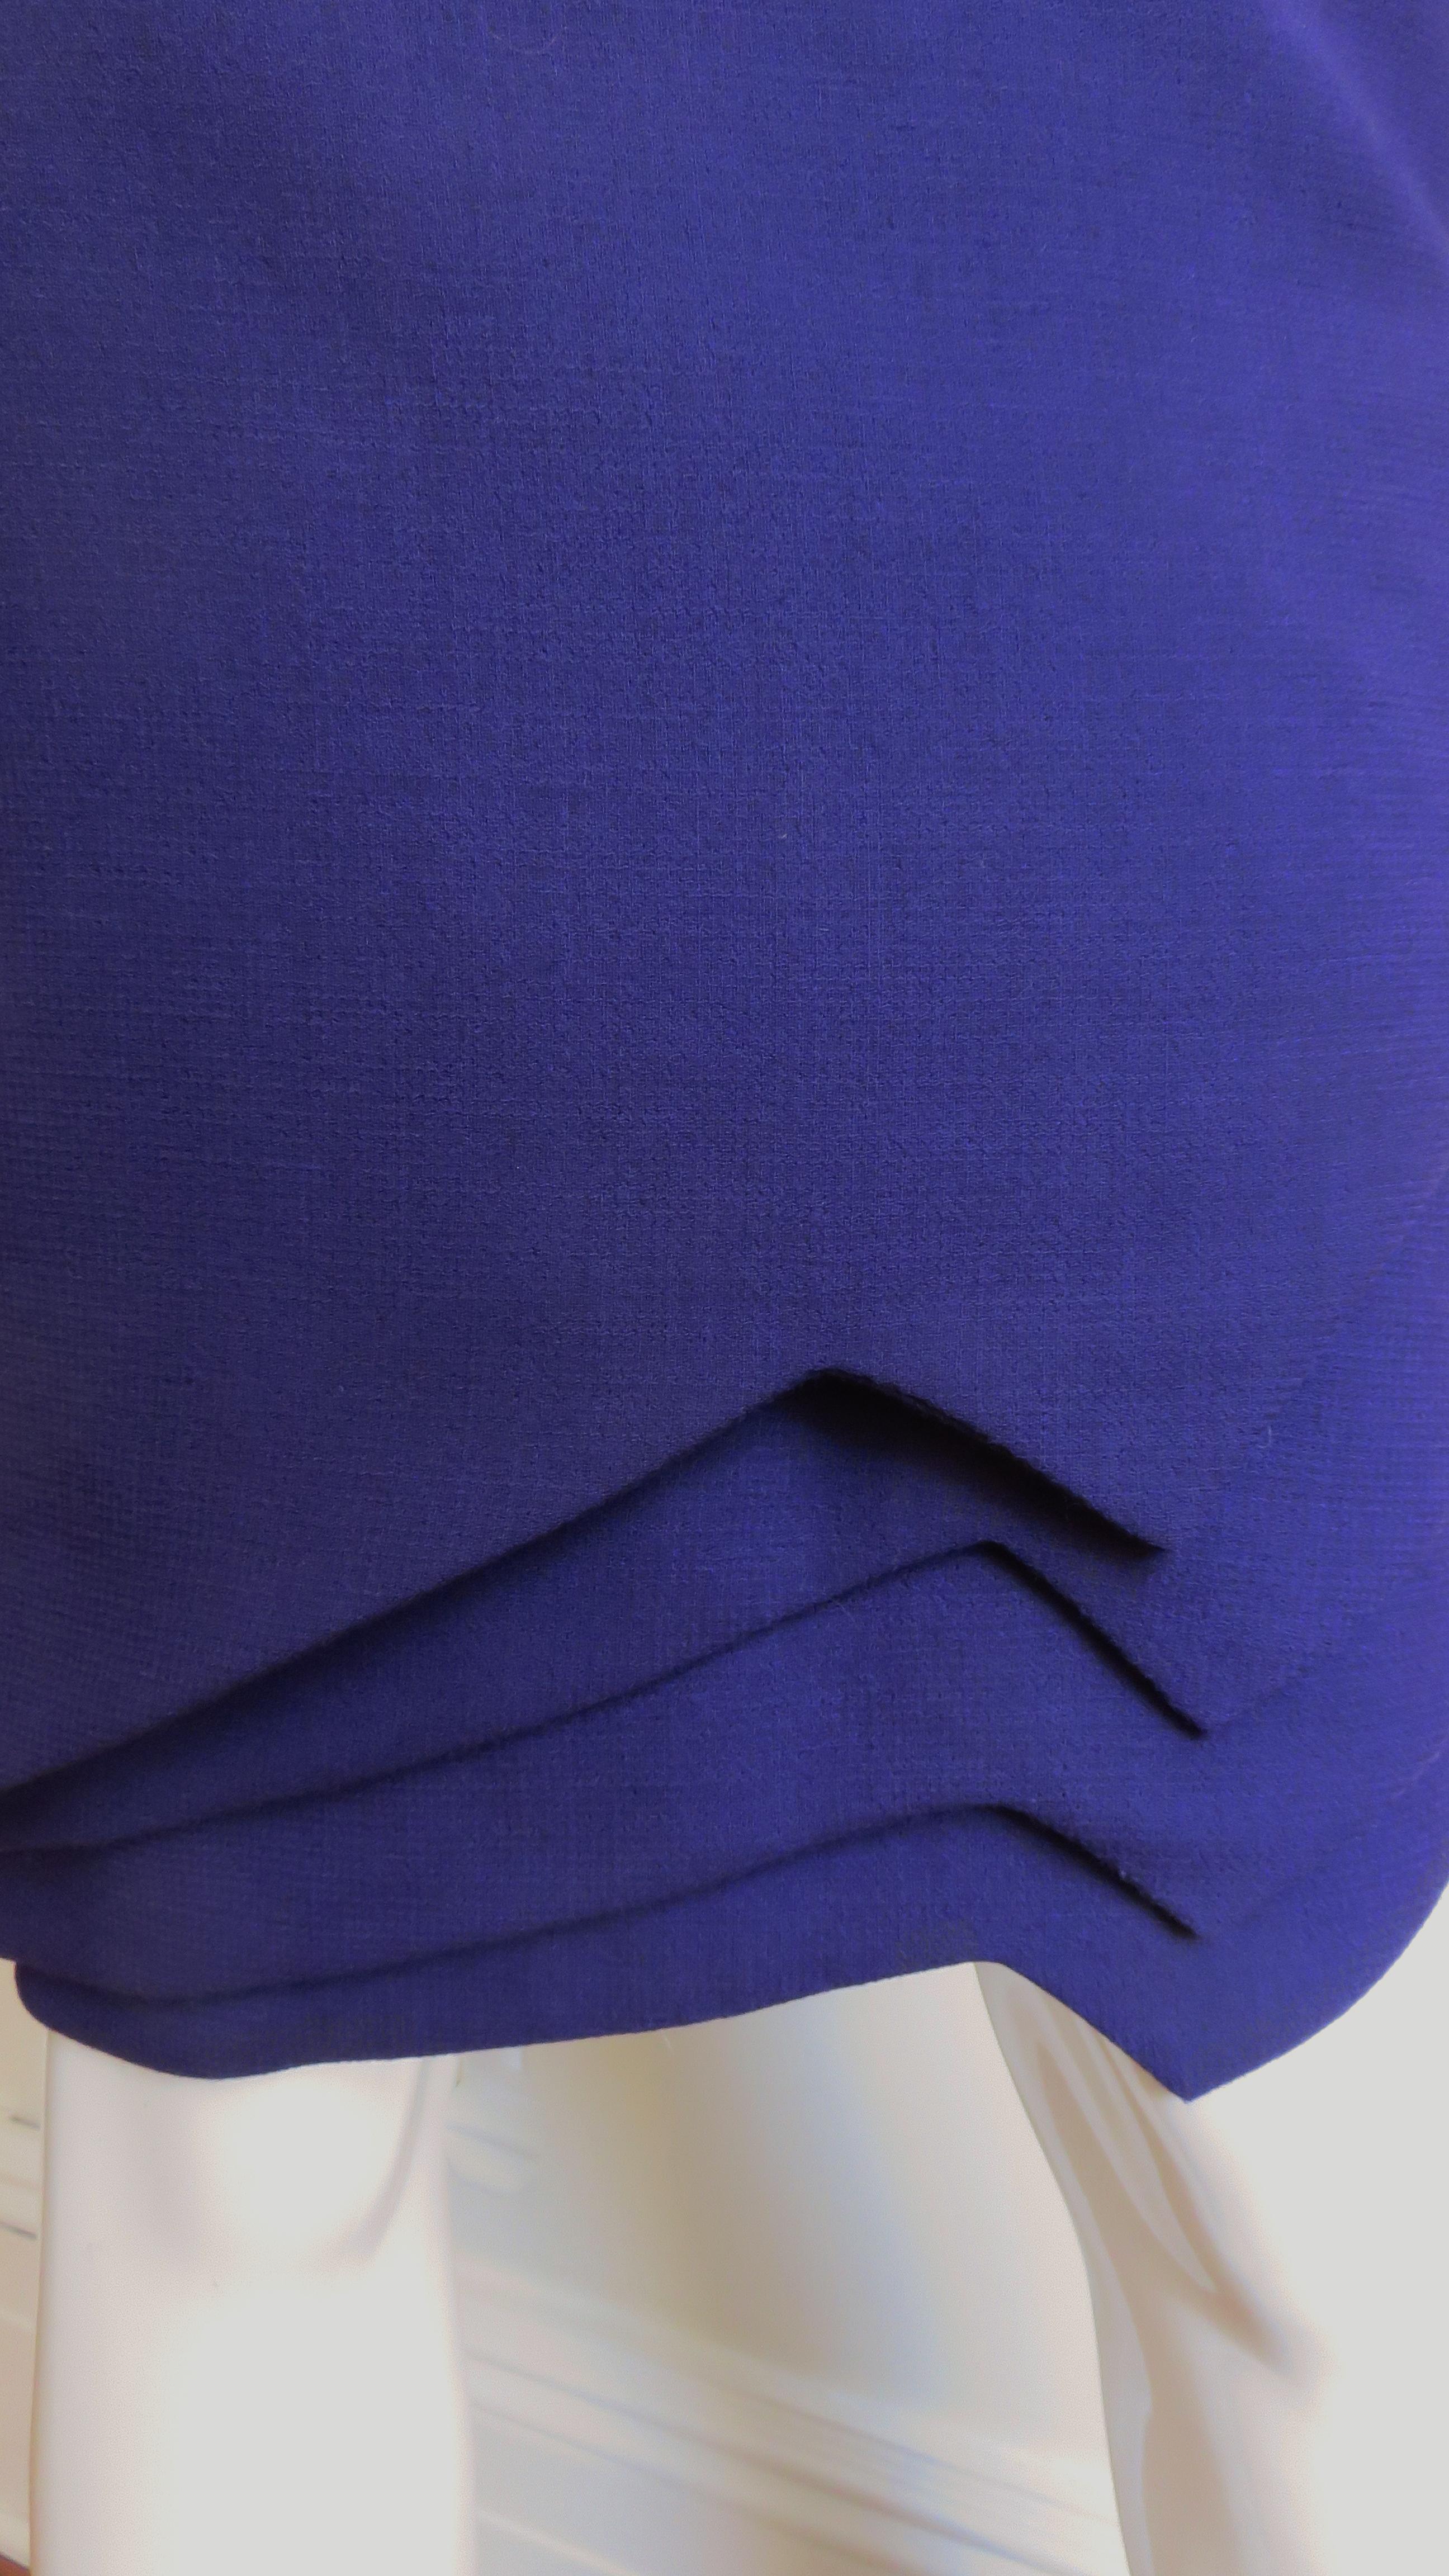 Gianni Versace Purple 1990s Dress with Origami Hem  In Good Condition For Sale In Water Mill, NY